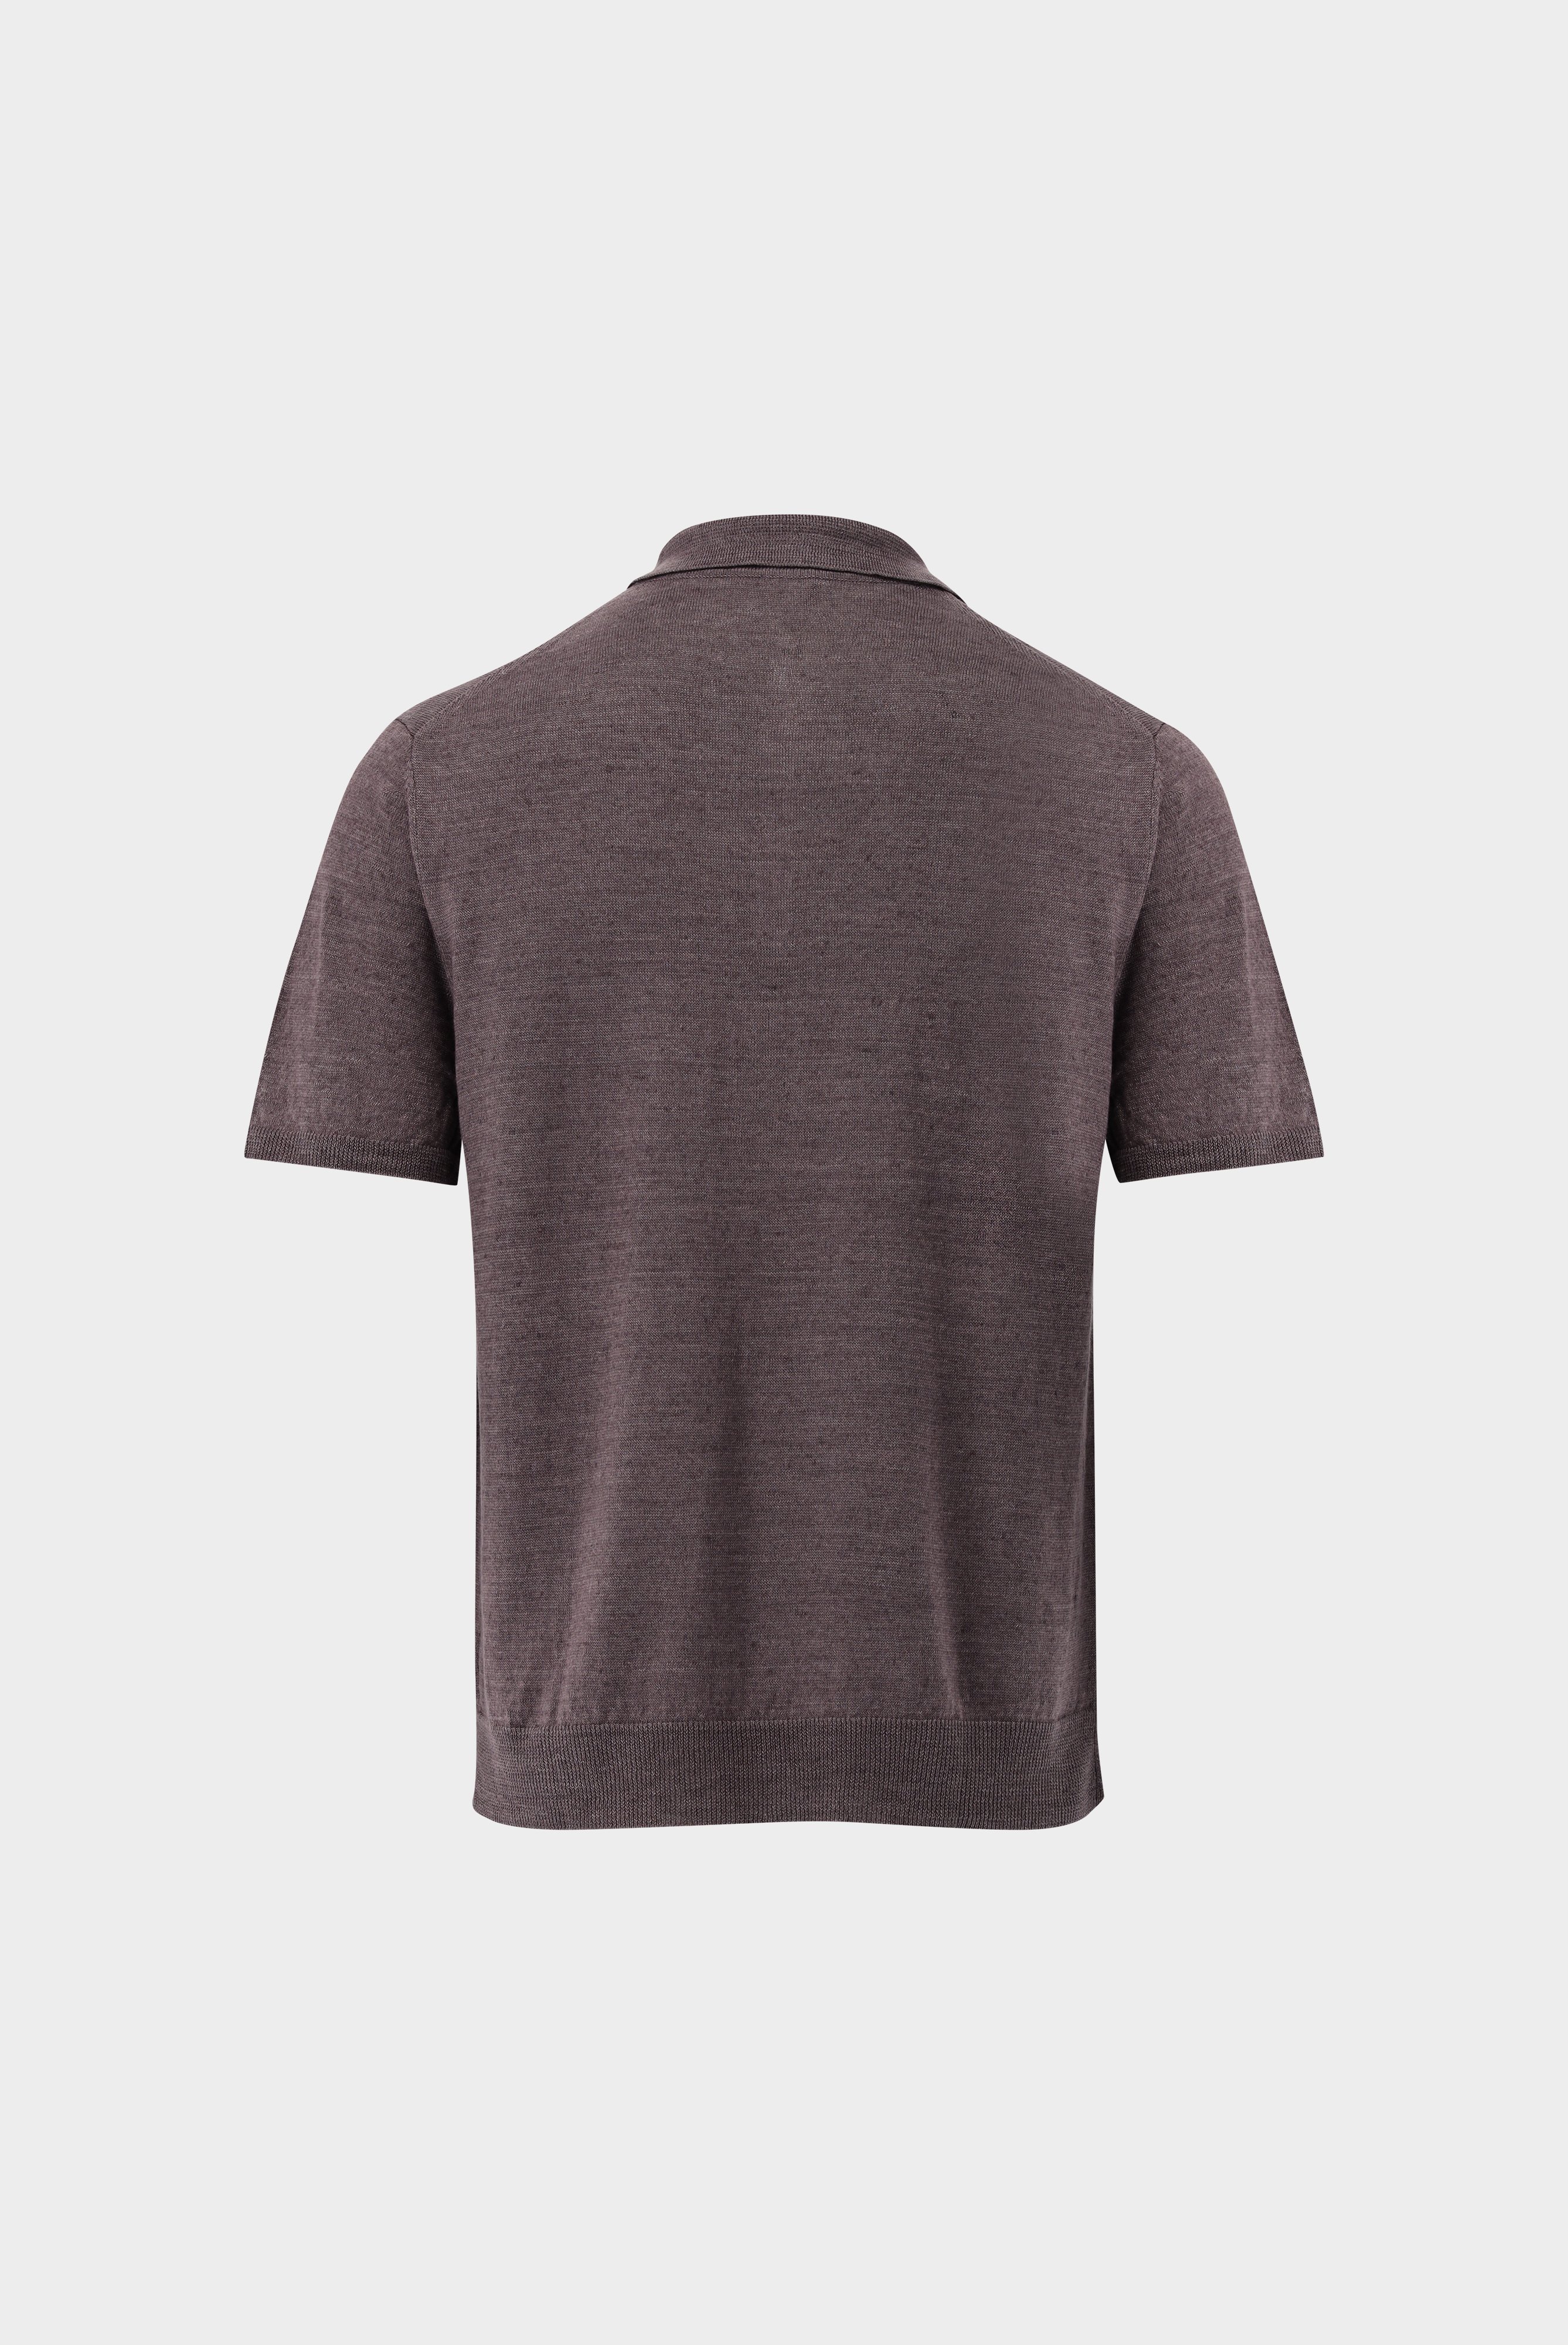 Poloshirts+Knit Polo in Linen+82.8603..S00169.680.S